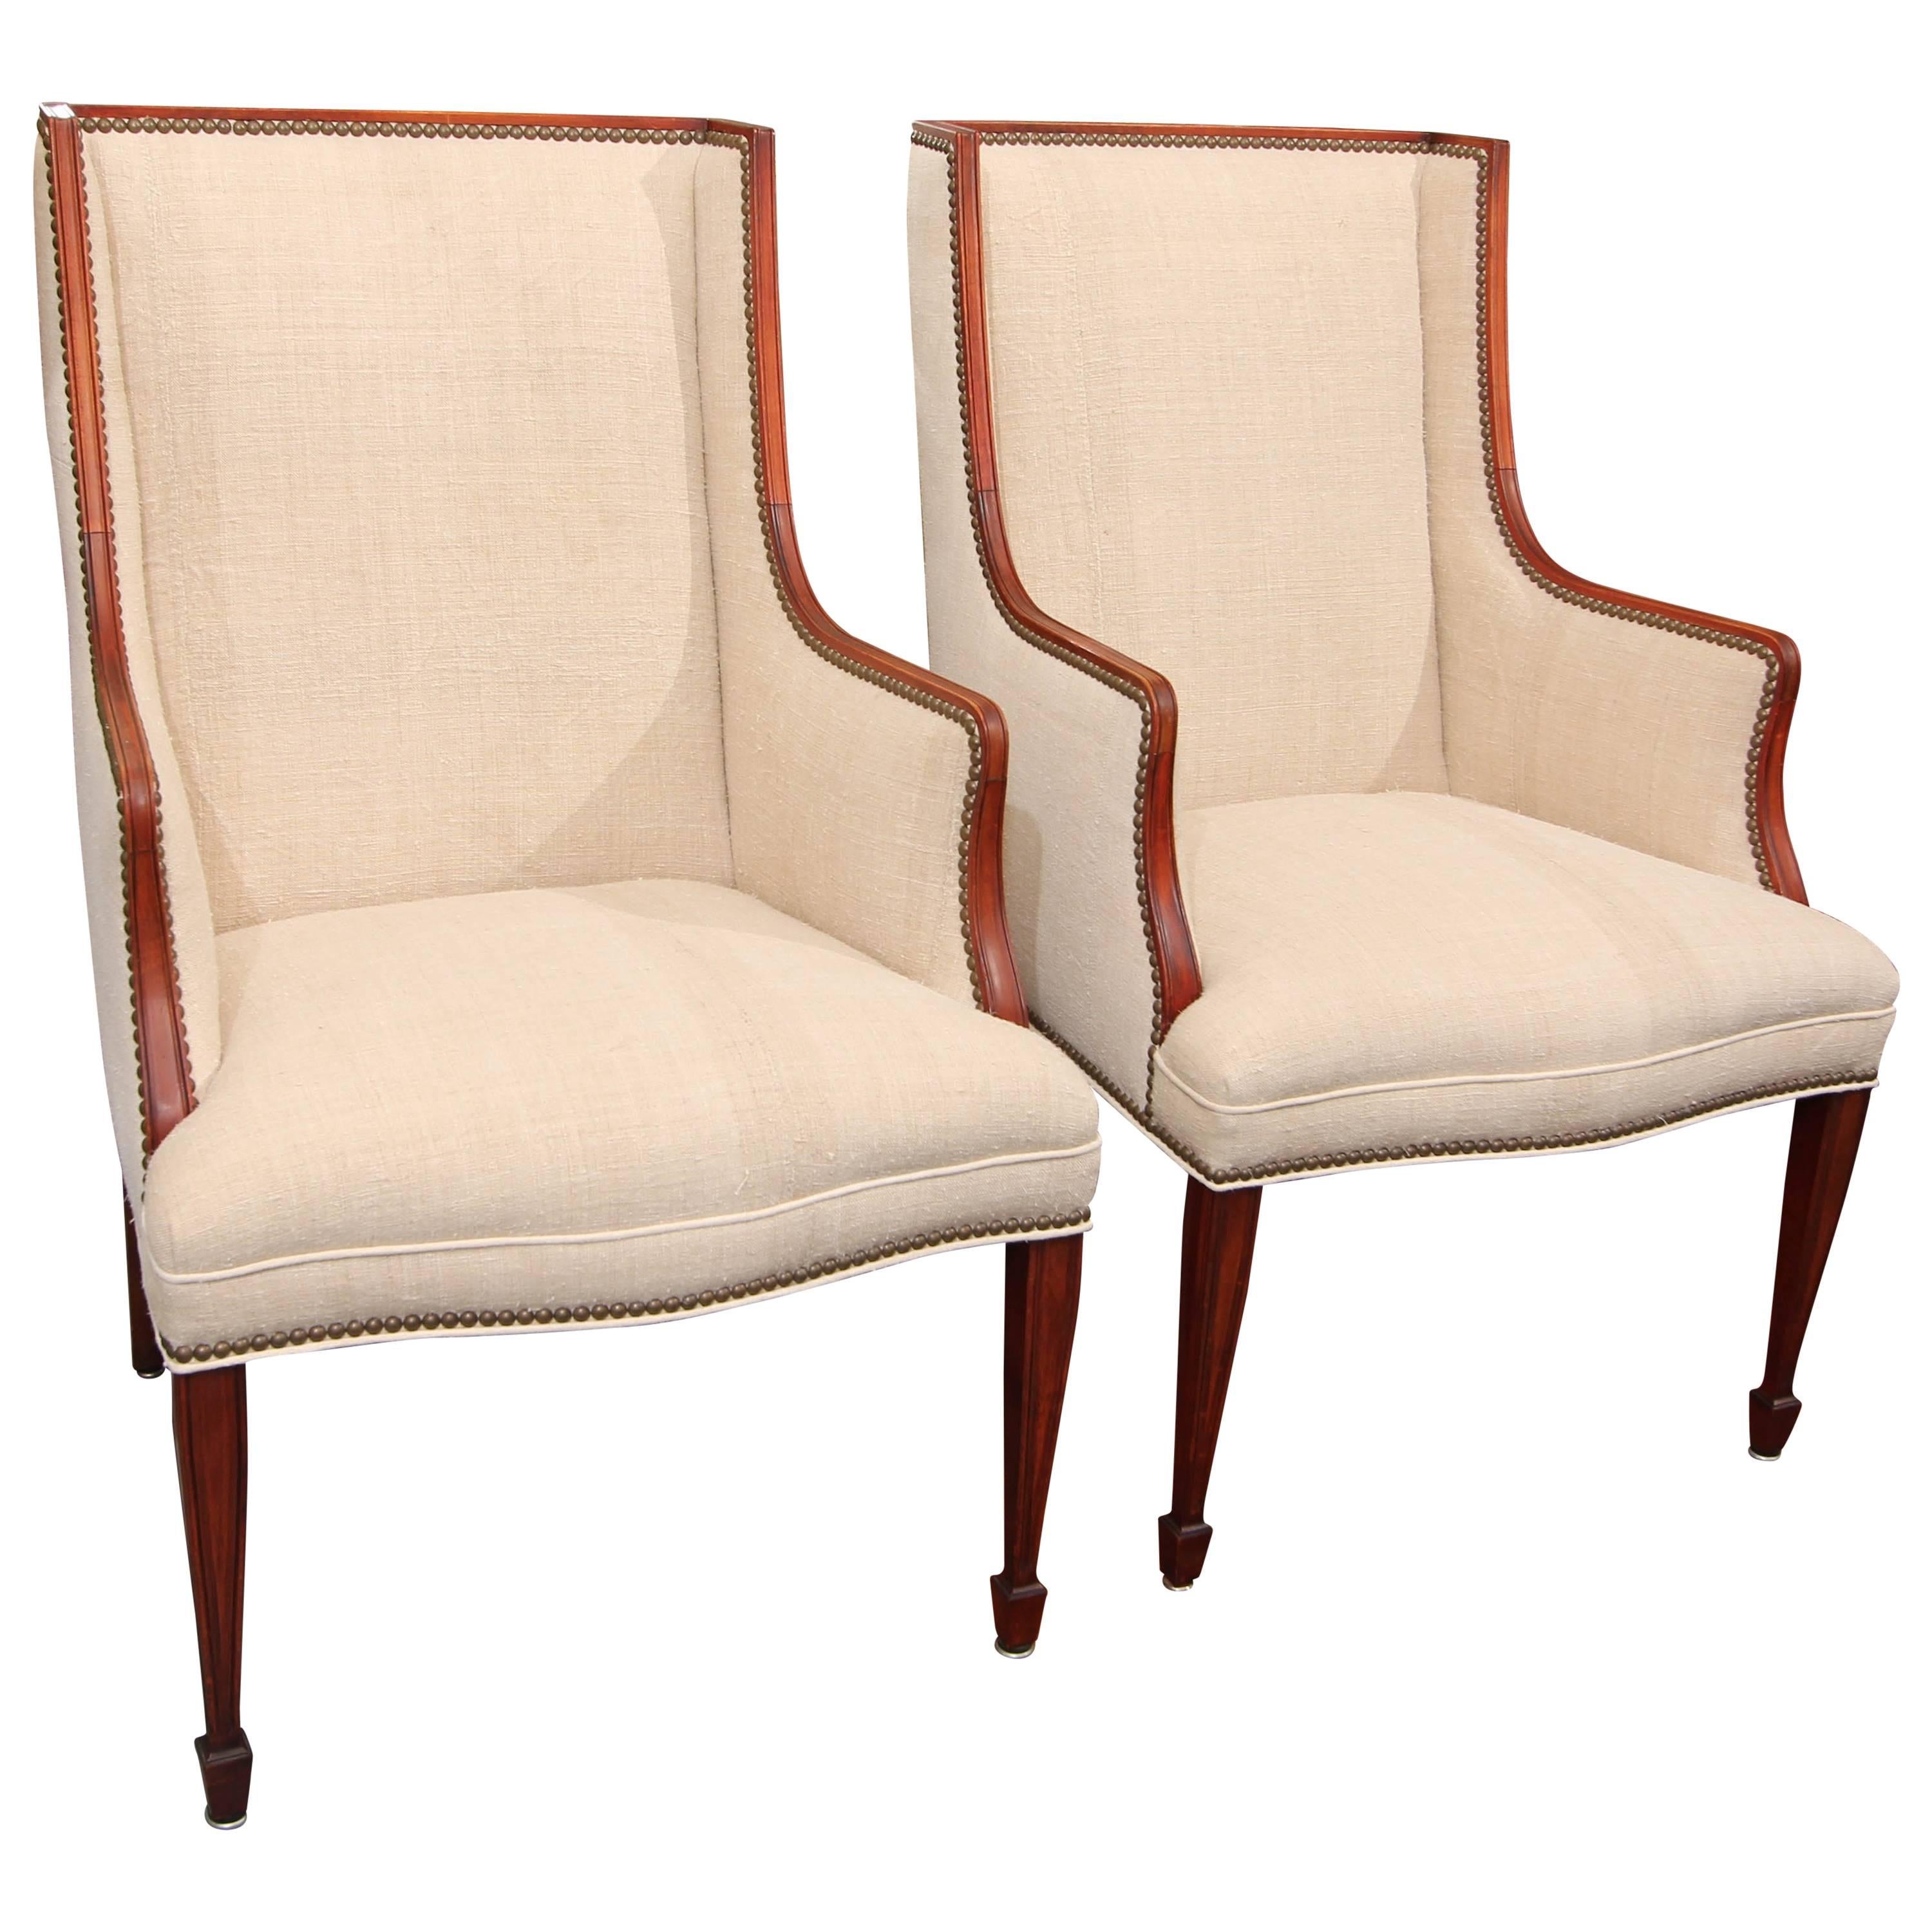 Midcentury Chairs in Hand-Loomed Linen